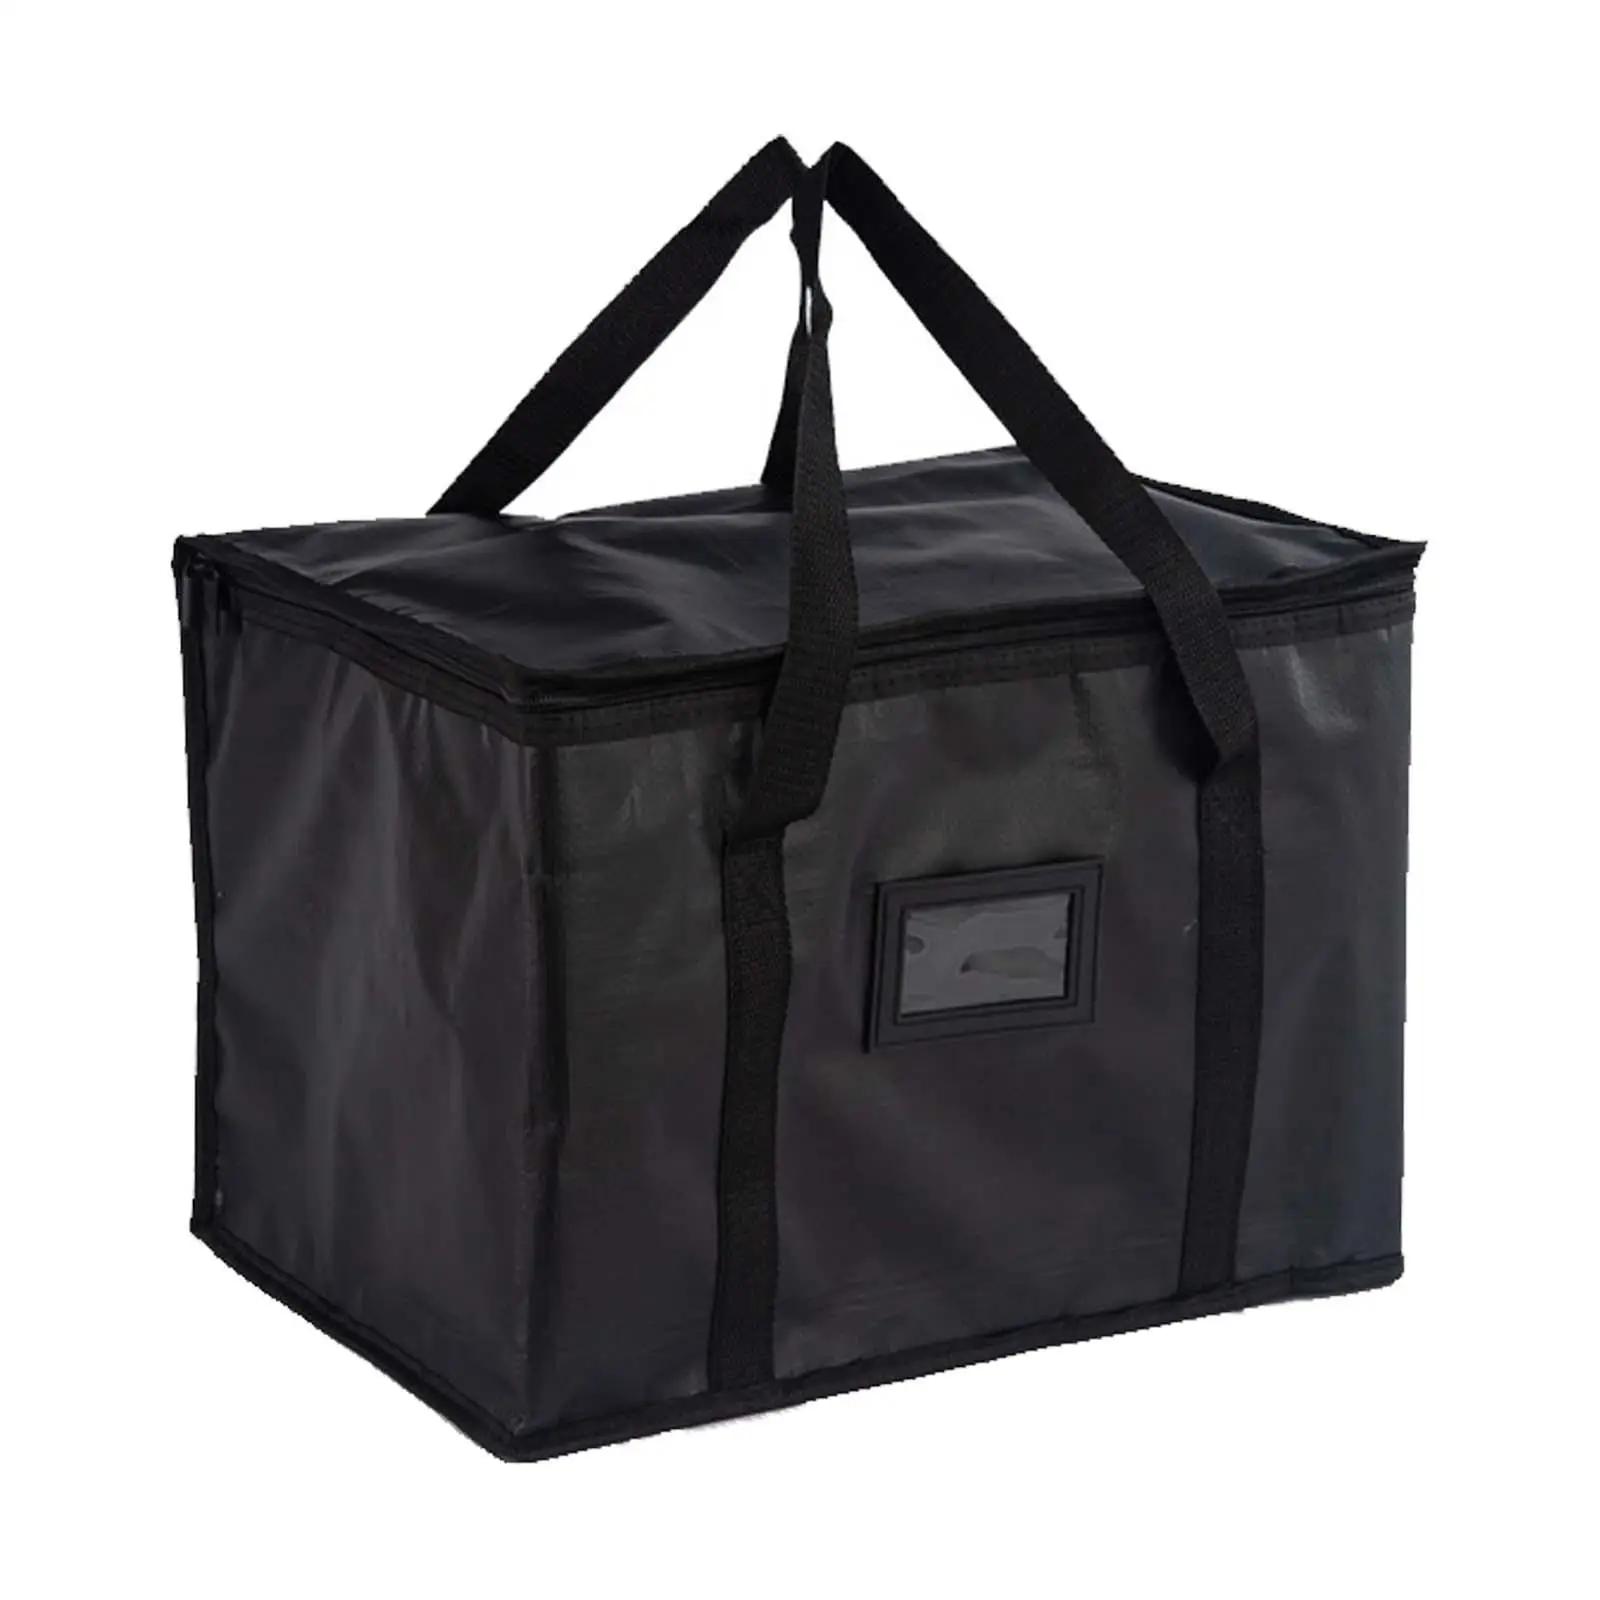 Insulated Cooler Bag Black 20wx15HX14D Inches with Zipper Closure Reusable Shopping Bag for Picnic Fishing BBQ Catering Outdoors